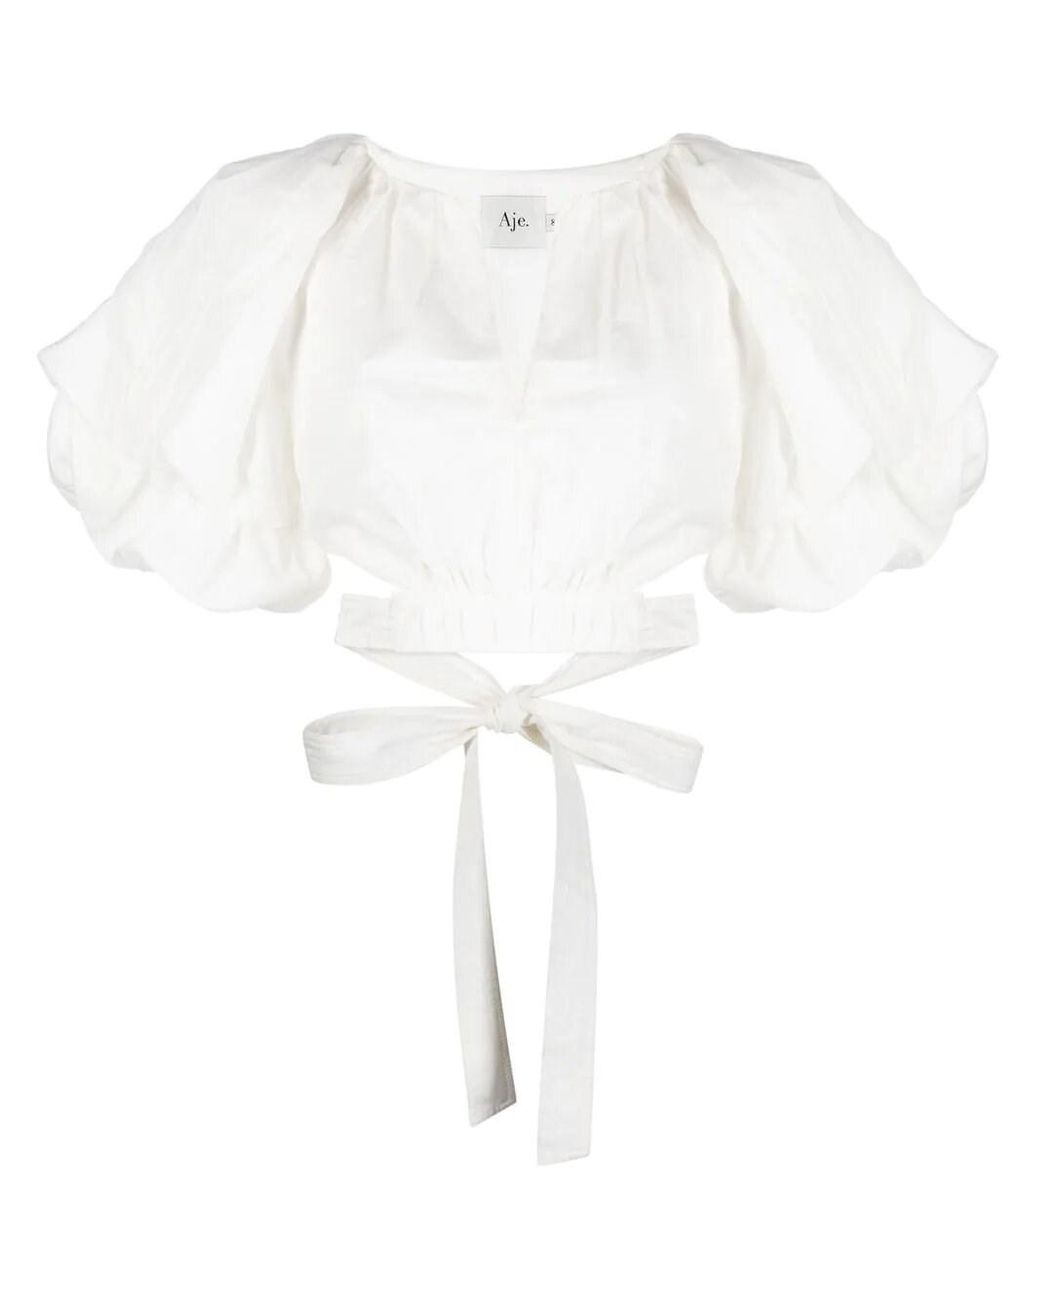 Aje. Puff-sleeve Cut-out Blouse in White | Lyst